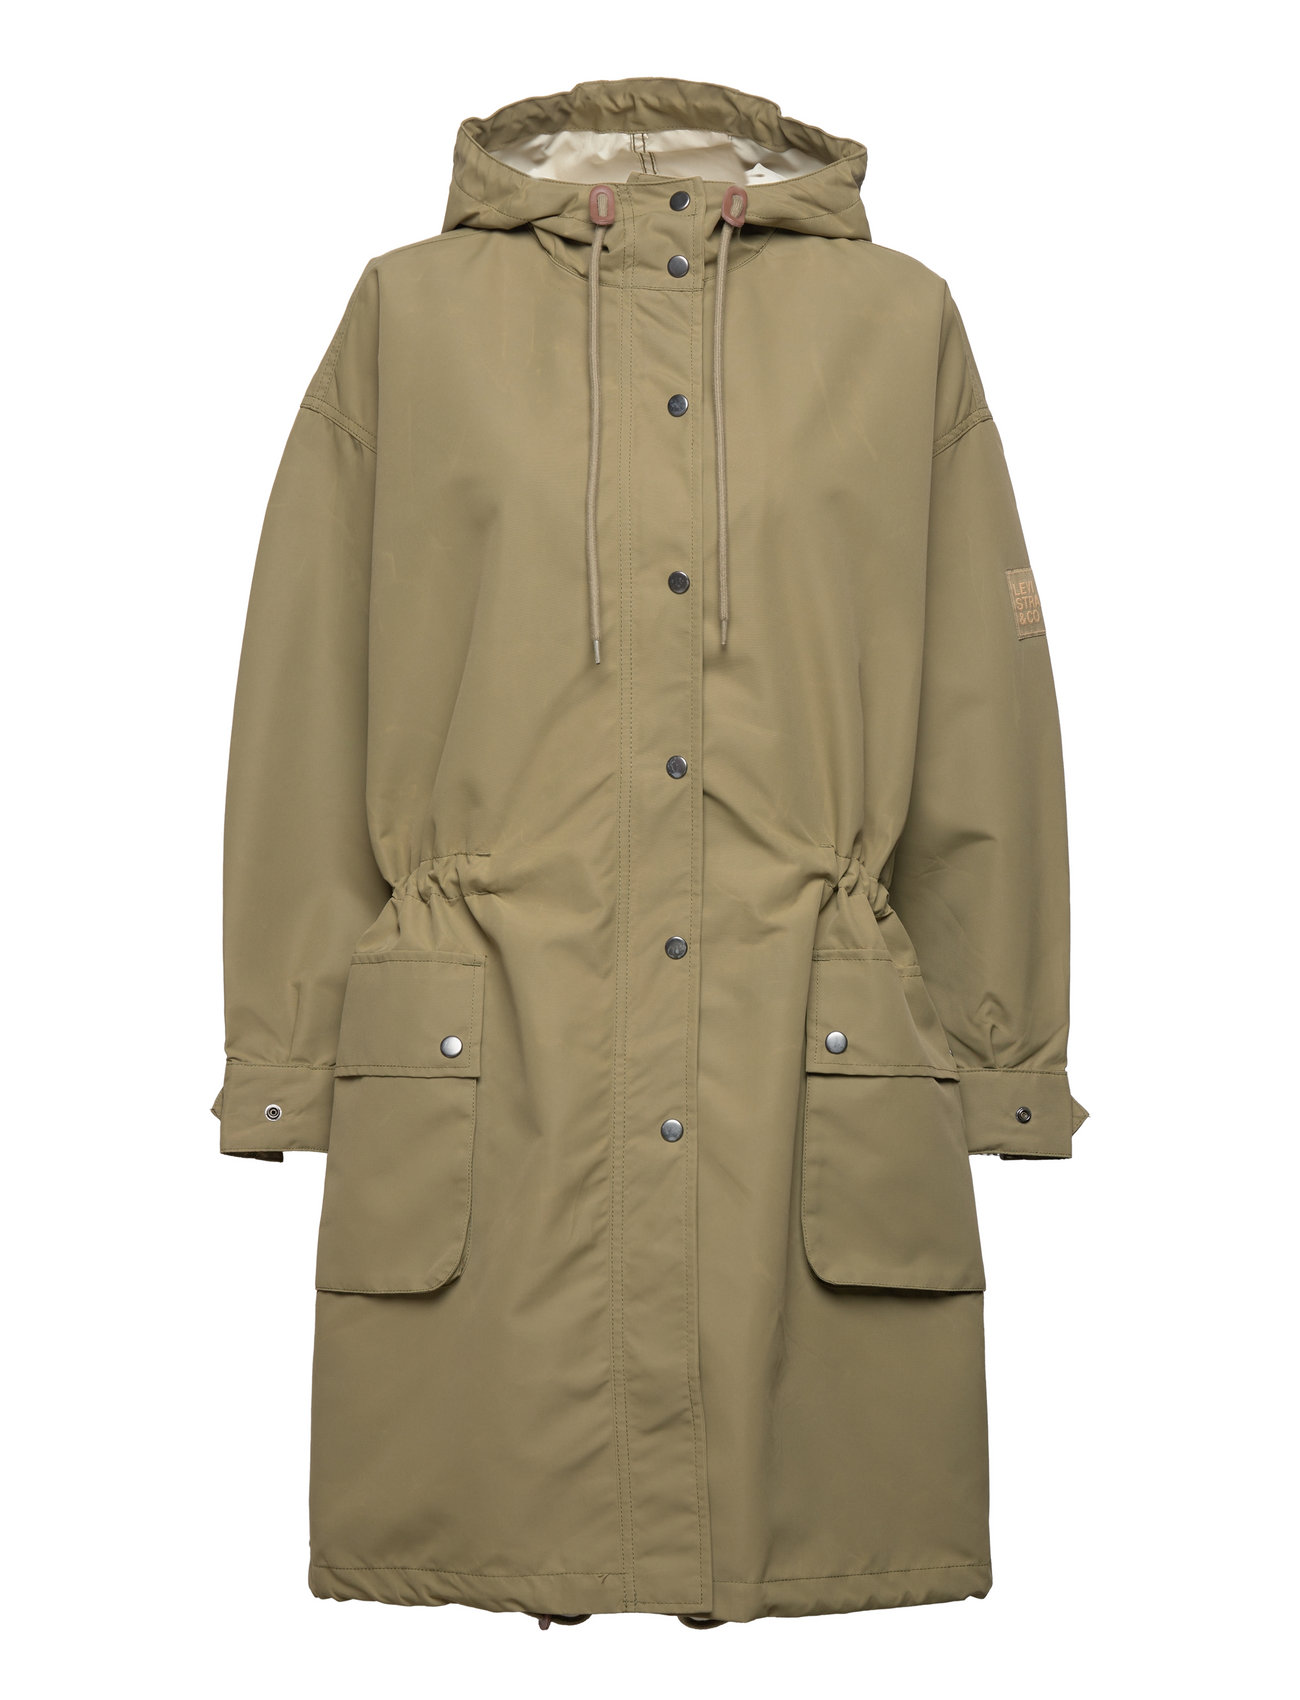 LEVI´S Women Sloan Rain Jacket Martini Oliv  €. Buy Parka Coats from  LEVI´S Women online at . Fast delivery and easy returns